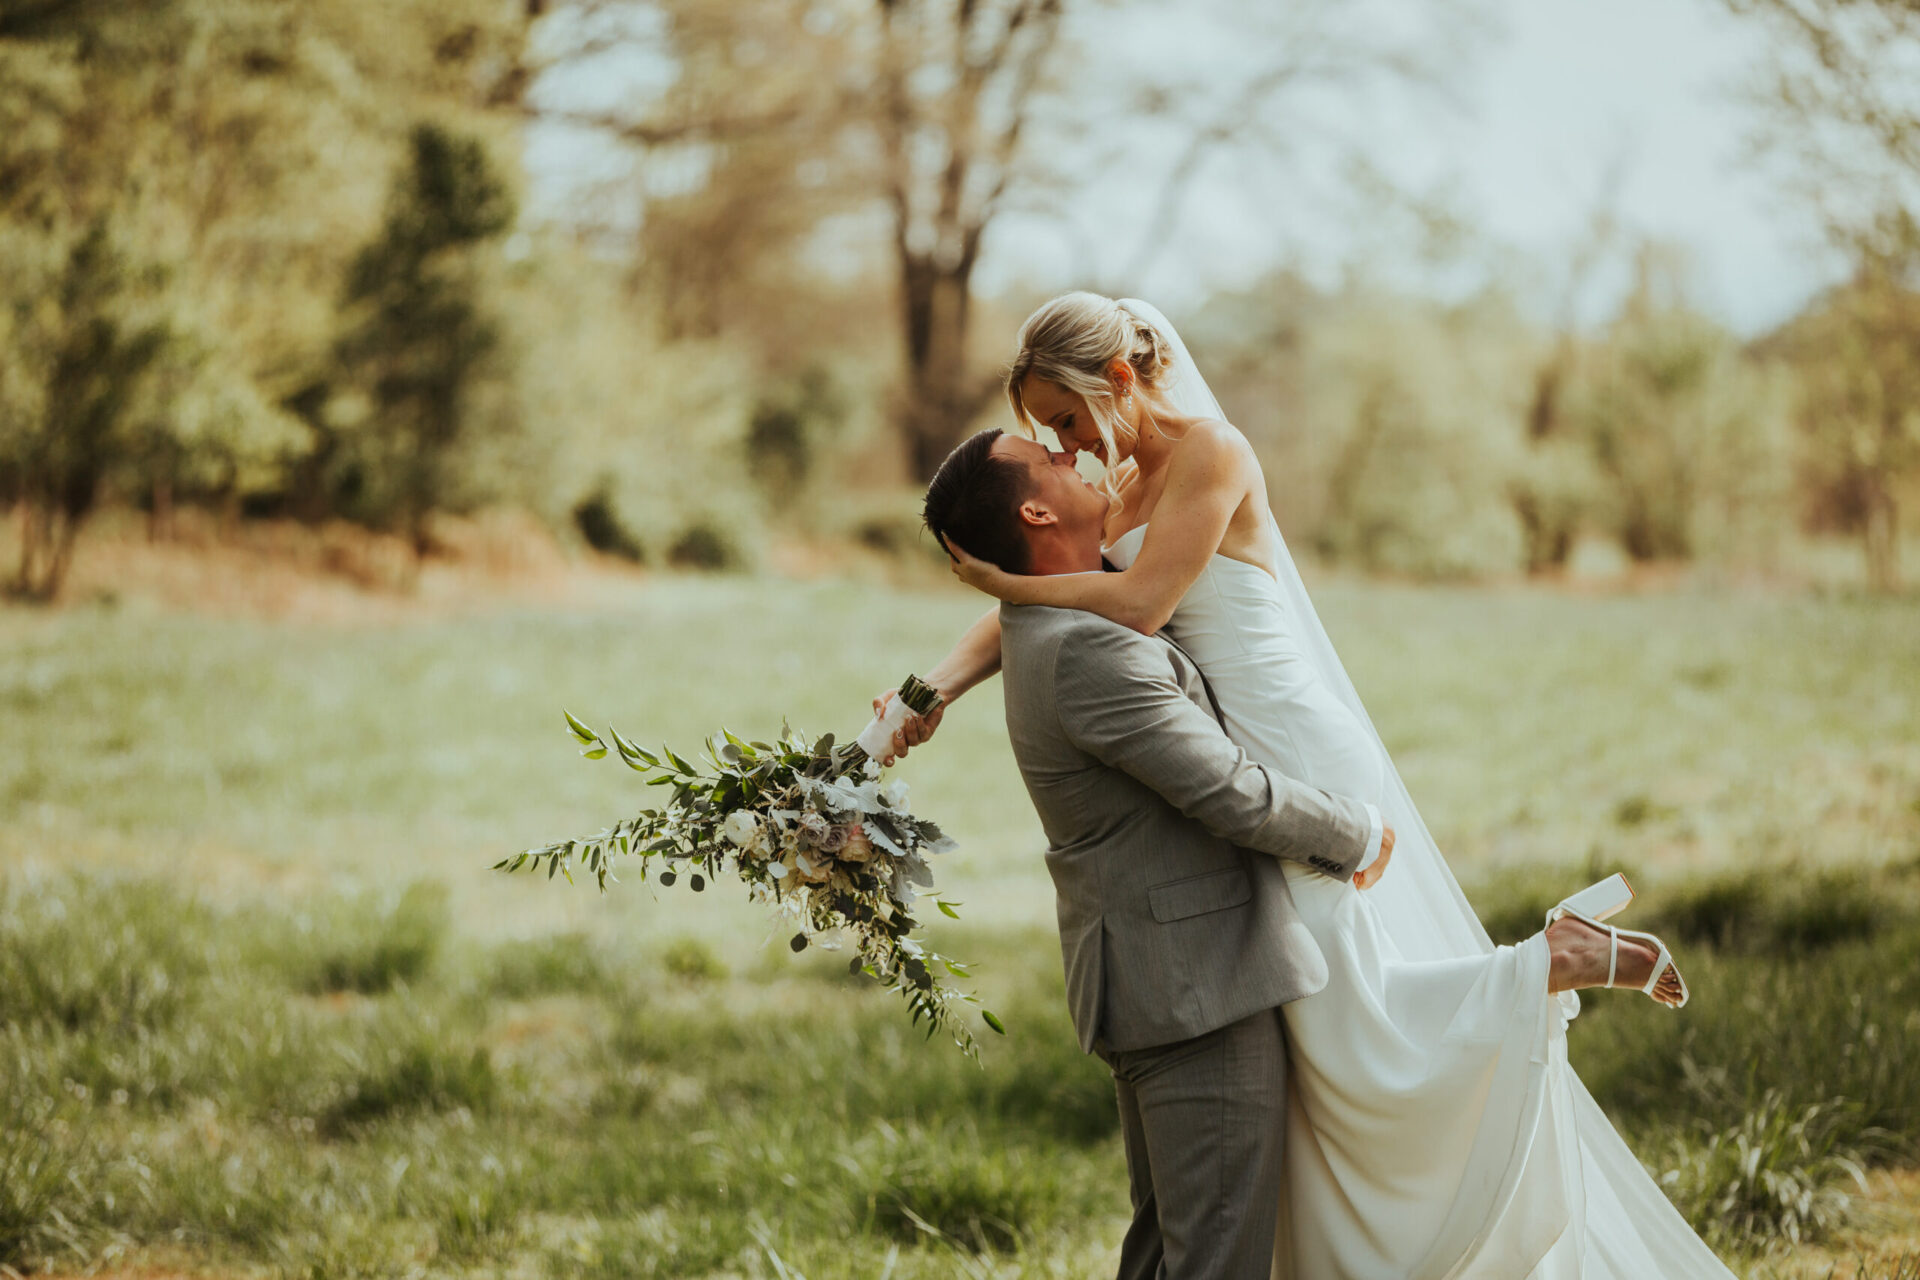 Featured image for “Brooke and Sean’s Spring Wedding”